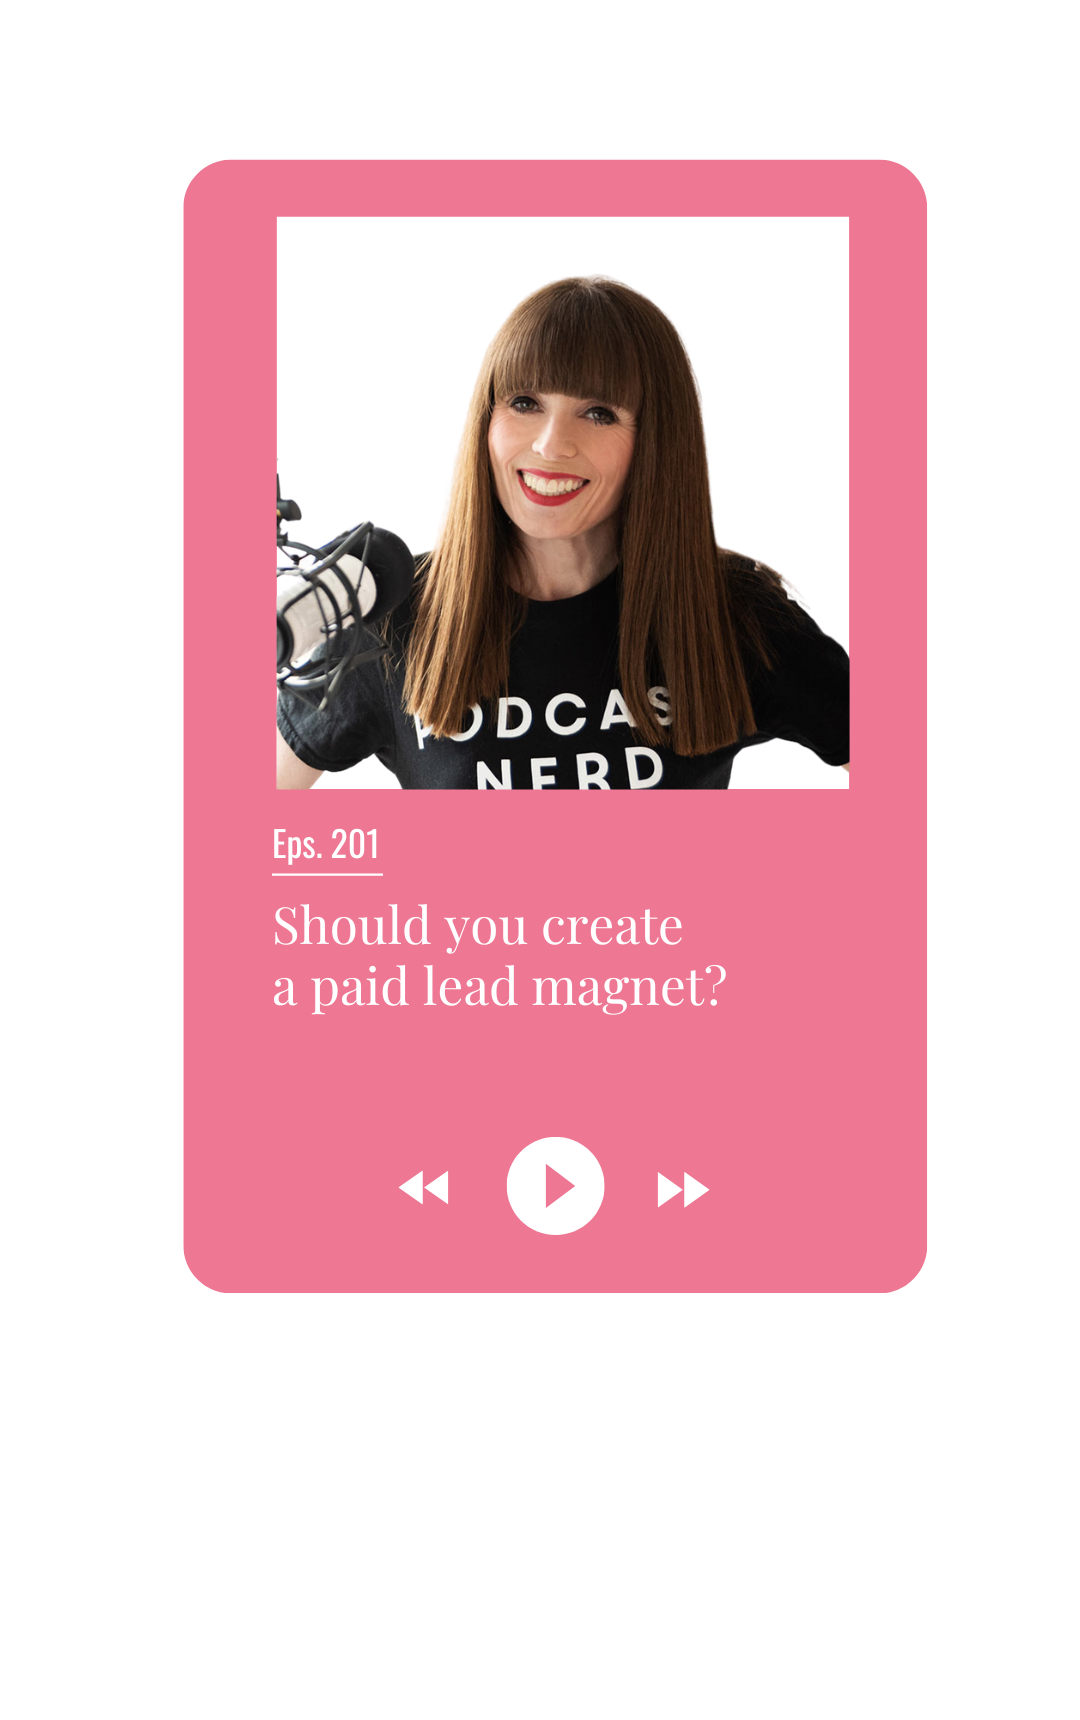 Should you create a paid lead magnet?